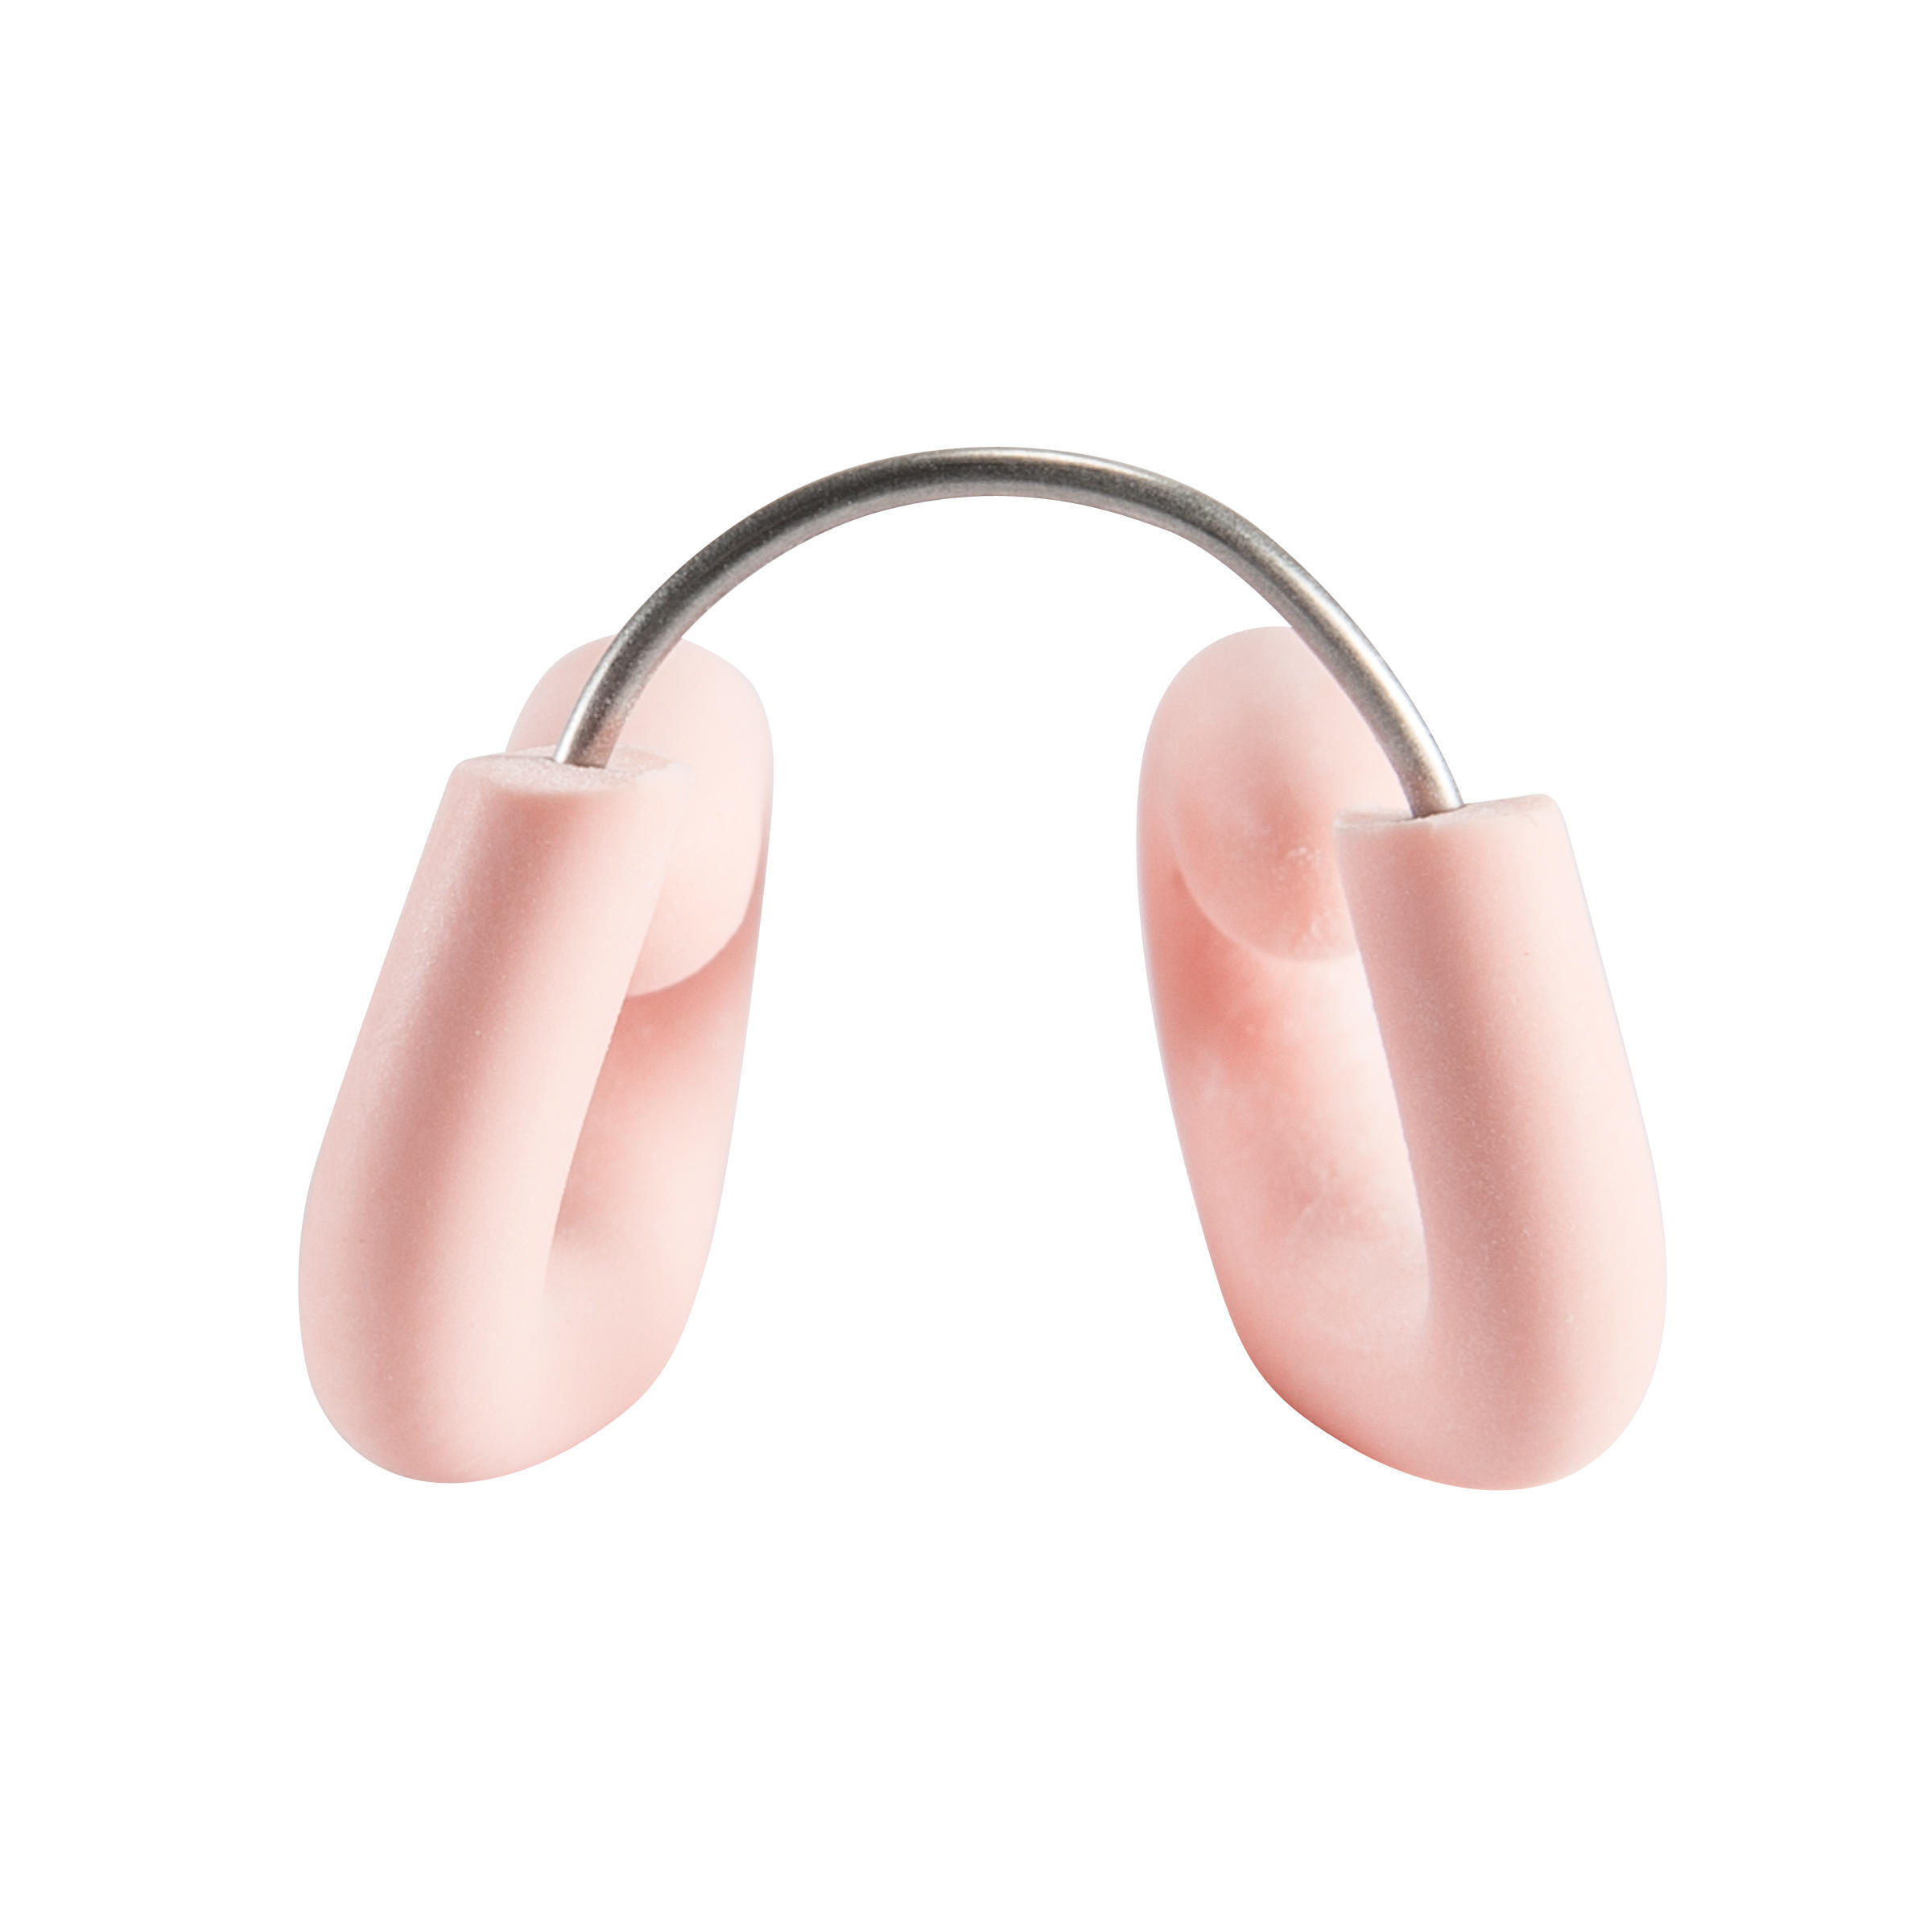 SWIMMING ADJUSTABLE STAINLESS STEEL-LATEX NOSE CLIP - PASTEL PINK 3/4